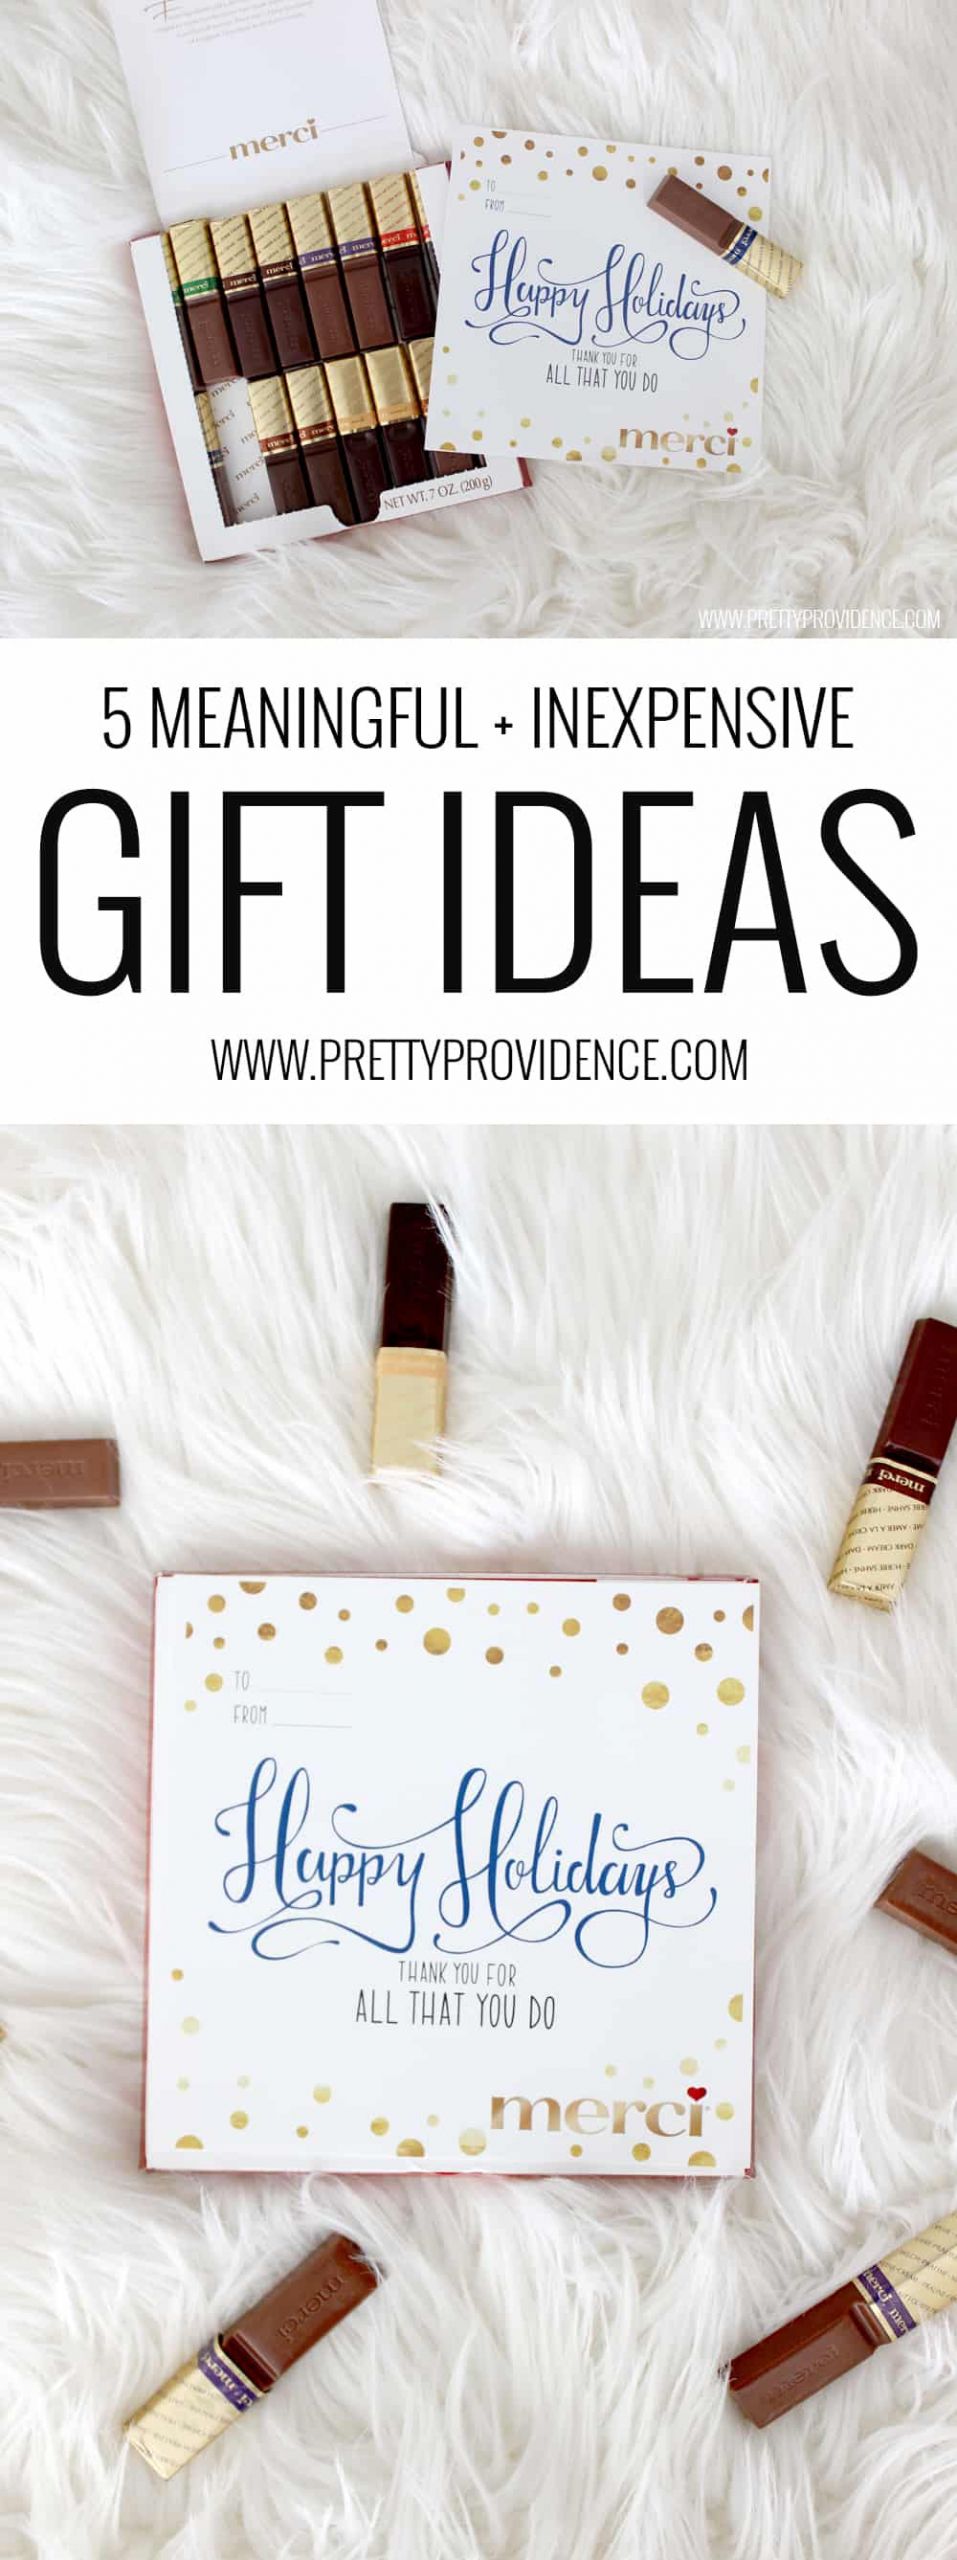 DIY Meaningful Gifts
 Meaningful and Inexpensive Gift Ideas